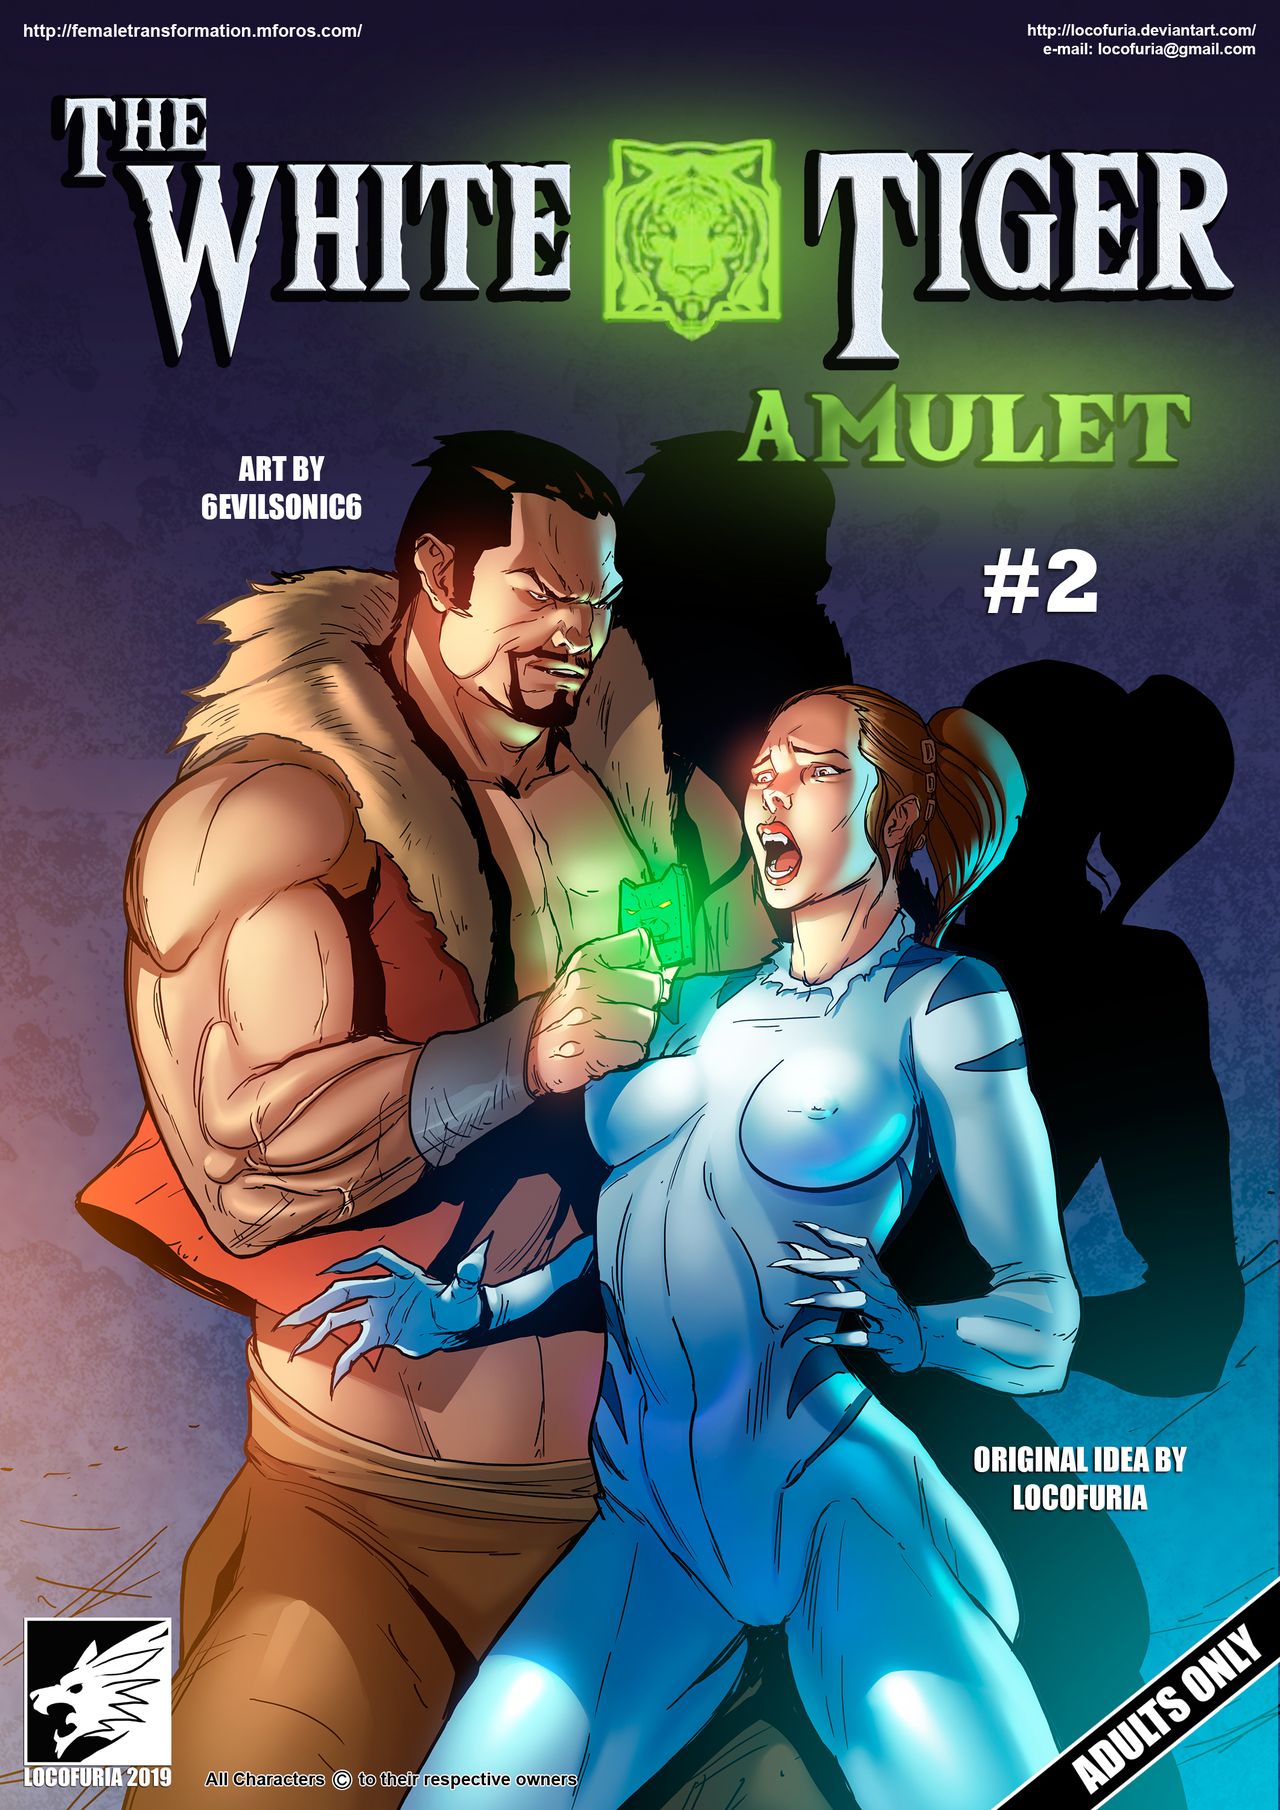 Spider-man - The White Tiger Amulet #2  [6evilsonic6] 